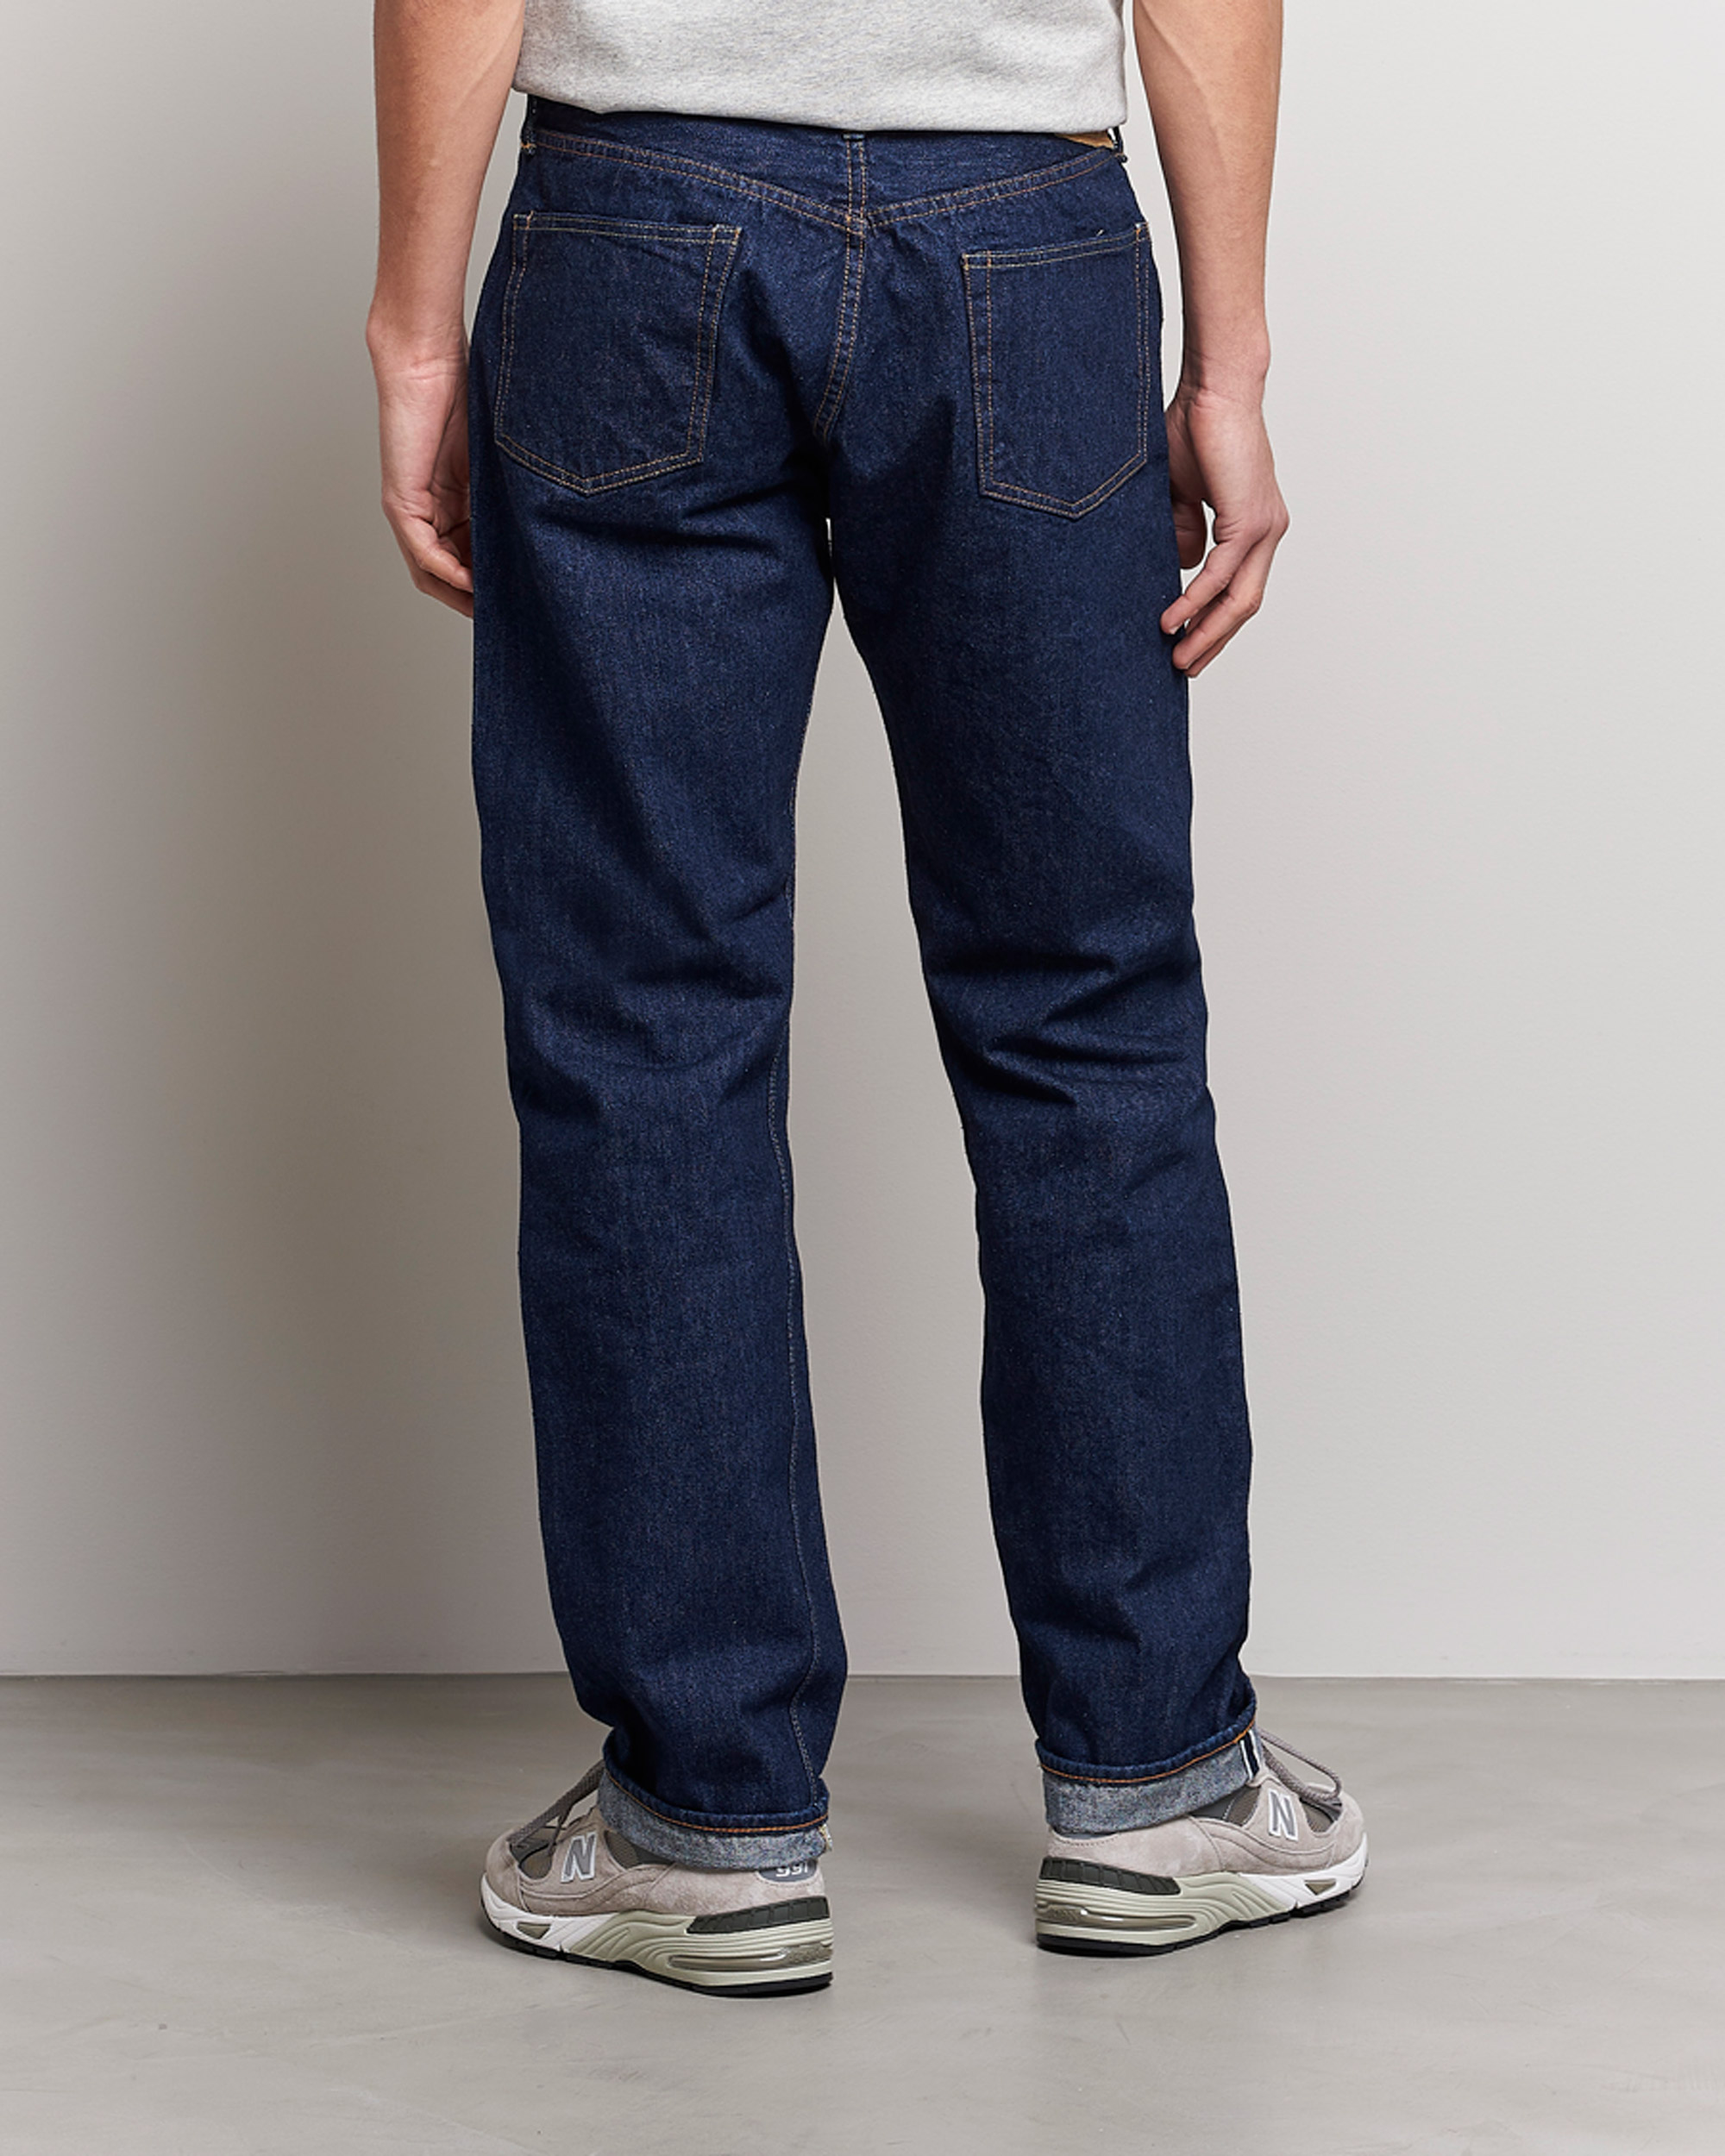 orSlow Straight Fit 105 Selvedge Jeans One Wash at